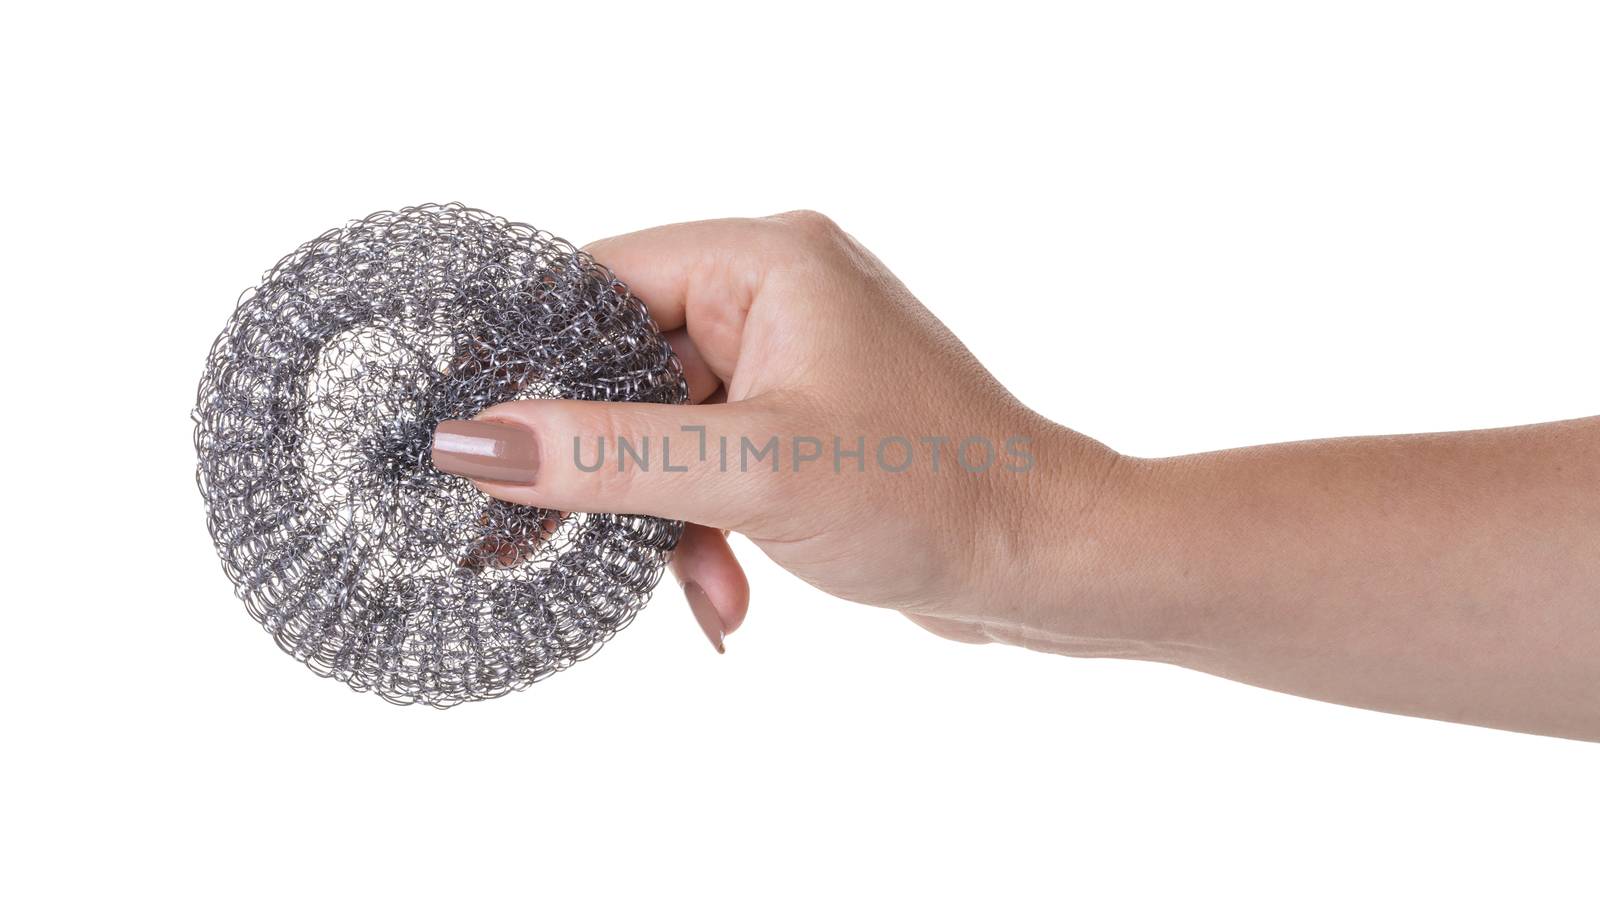 metal sponge for utensils in a female hand on white isolated background